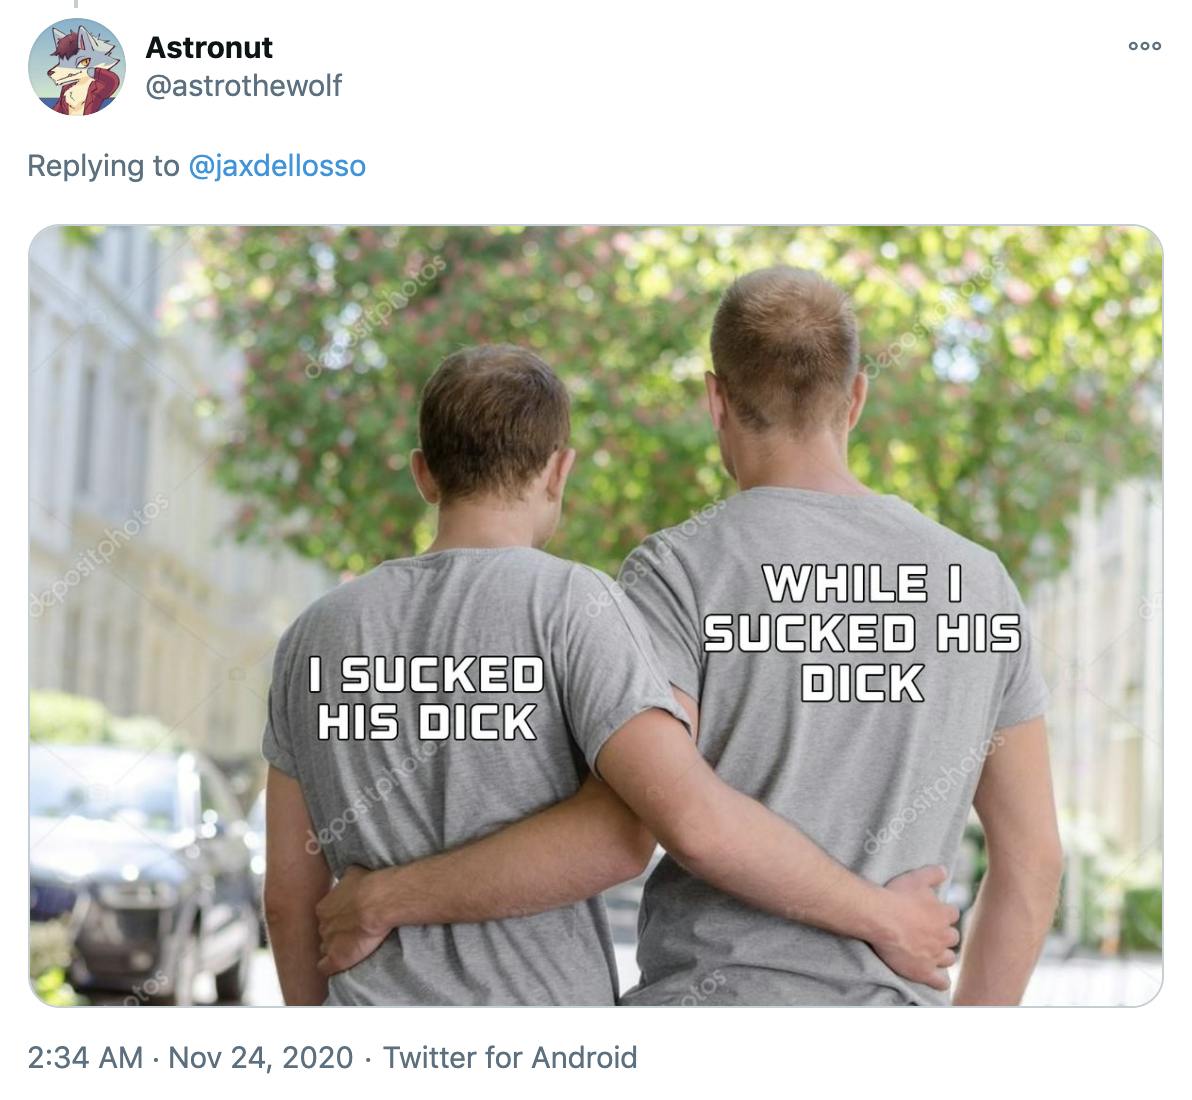 A stock photo of two white men with their arms around each other taken from behind. One shirt says 'I sucked his dick' and the other says 'While I sucked his dick'